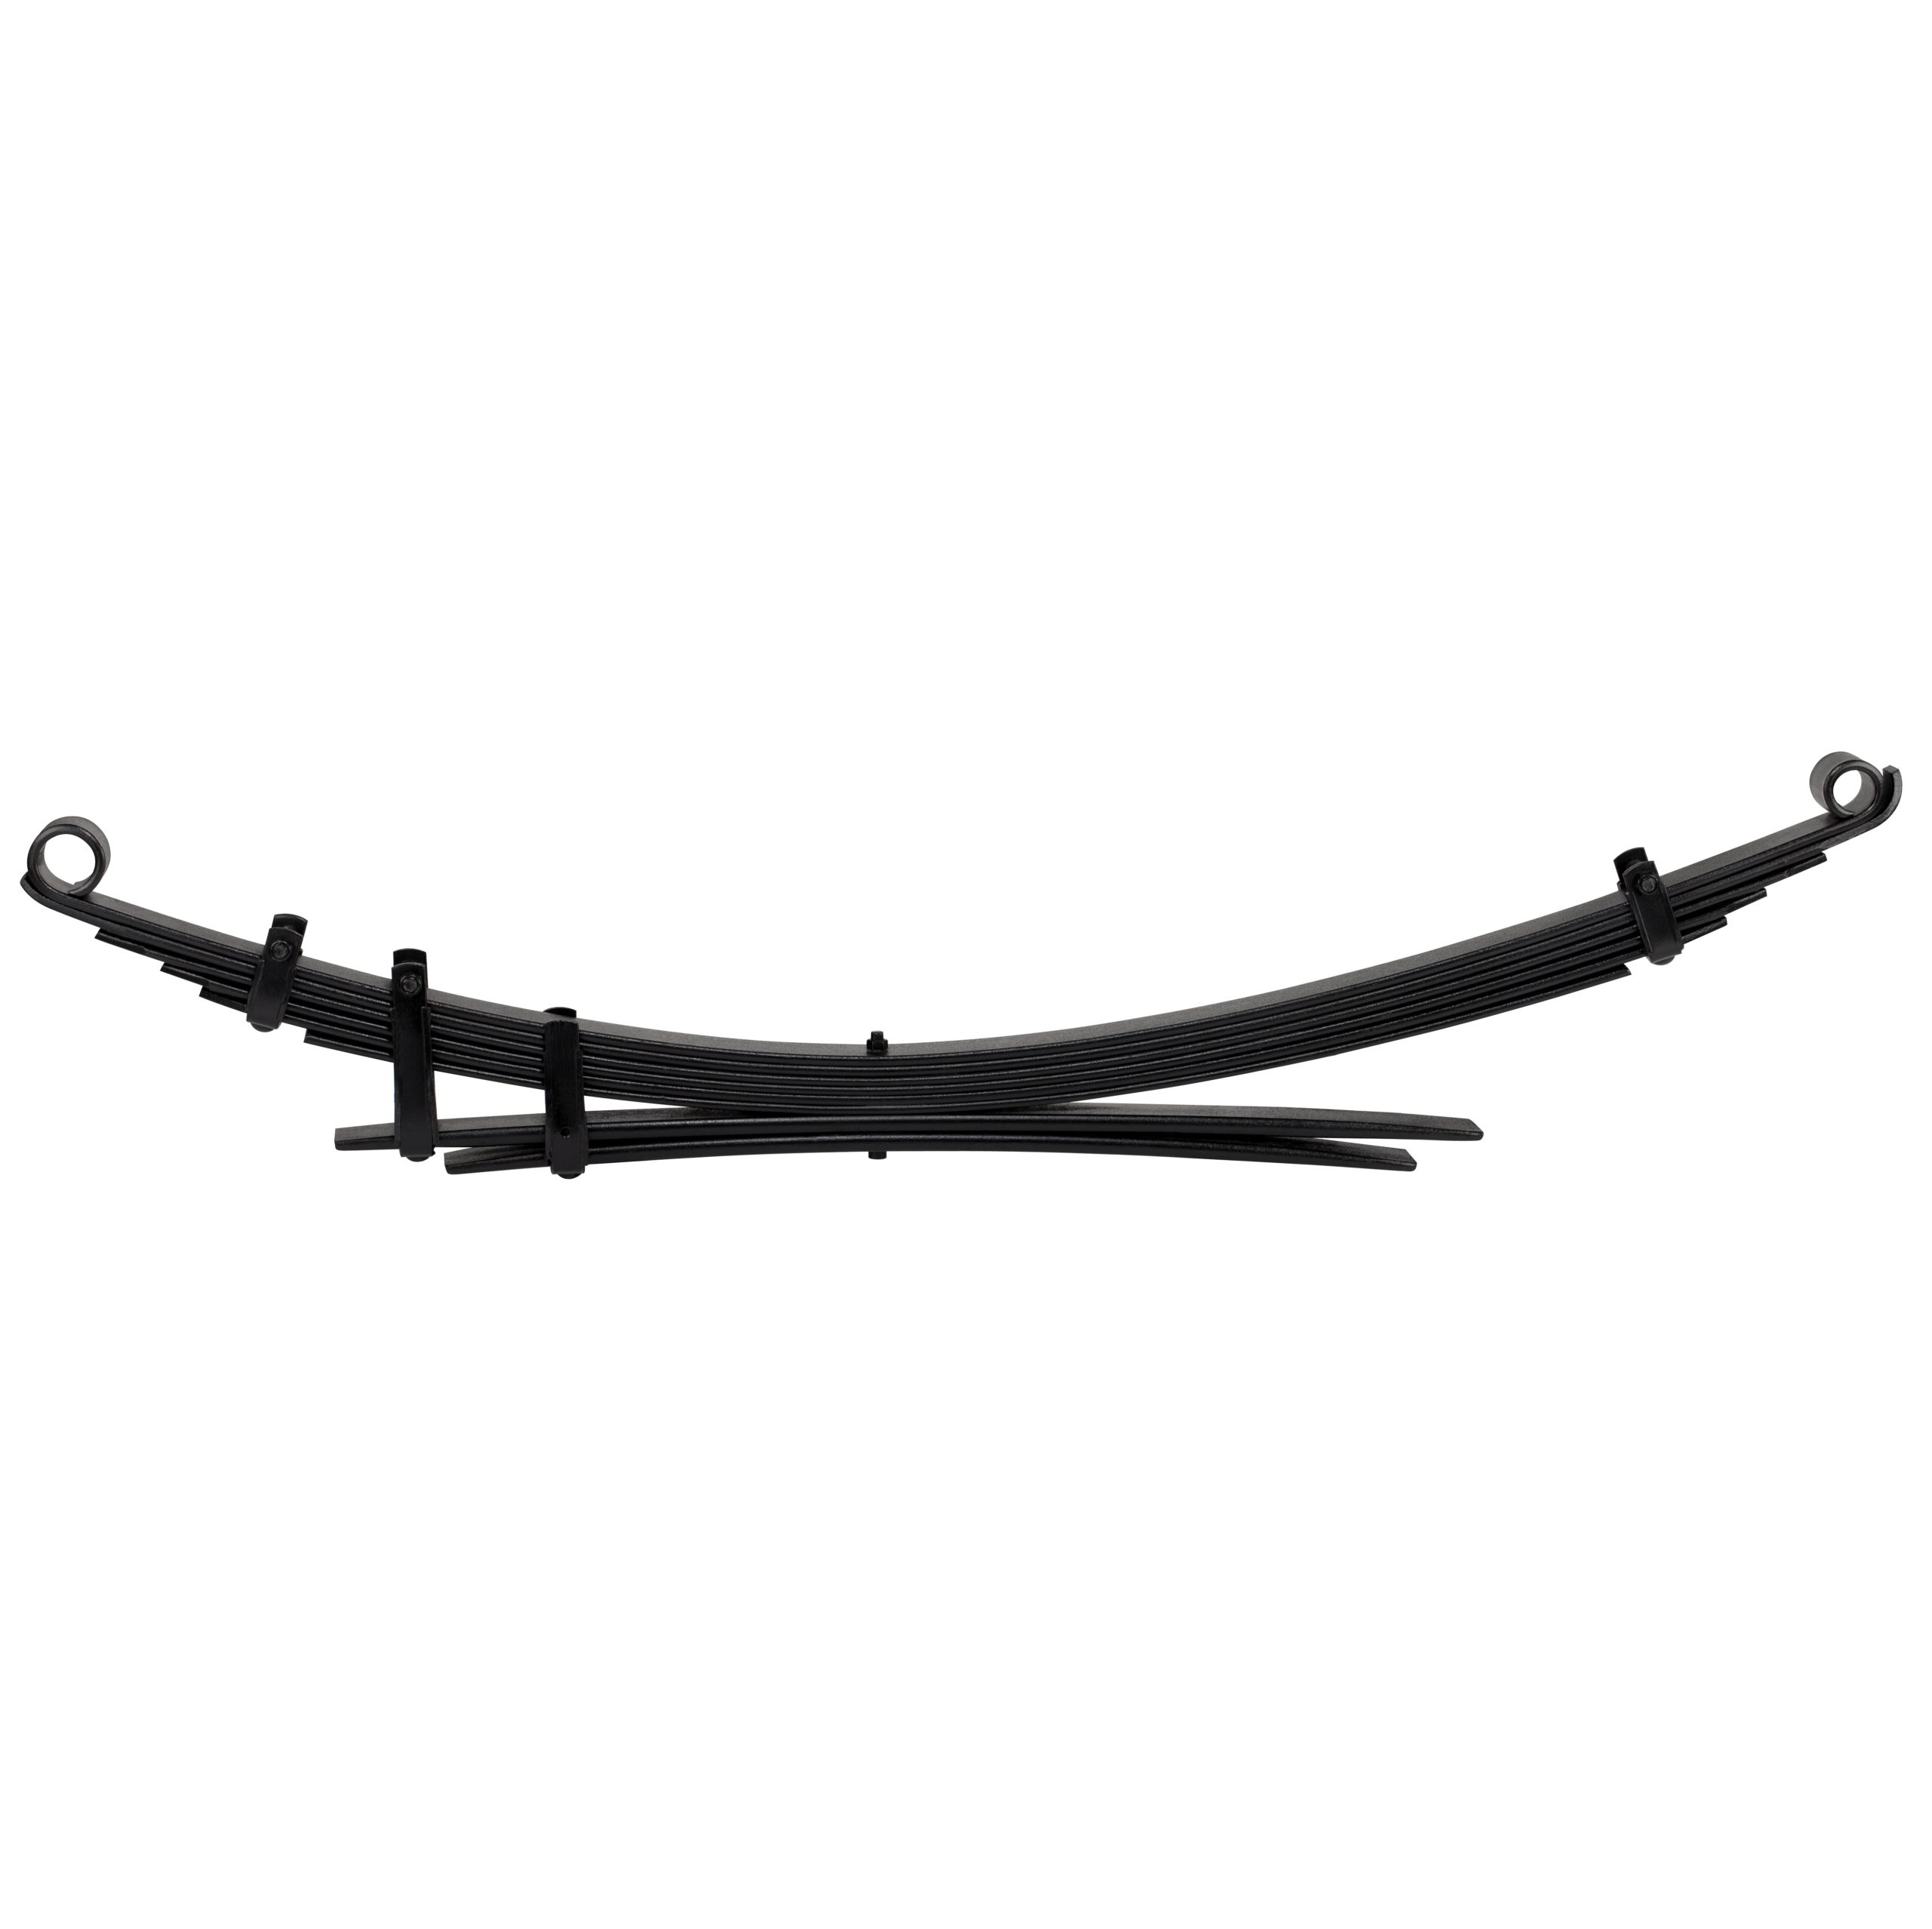 F-150 Heavy with Accessories REAR LEAF SPRING